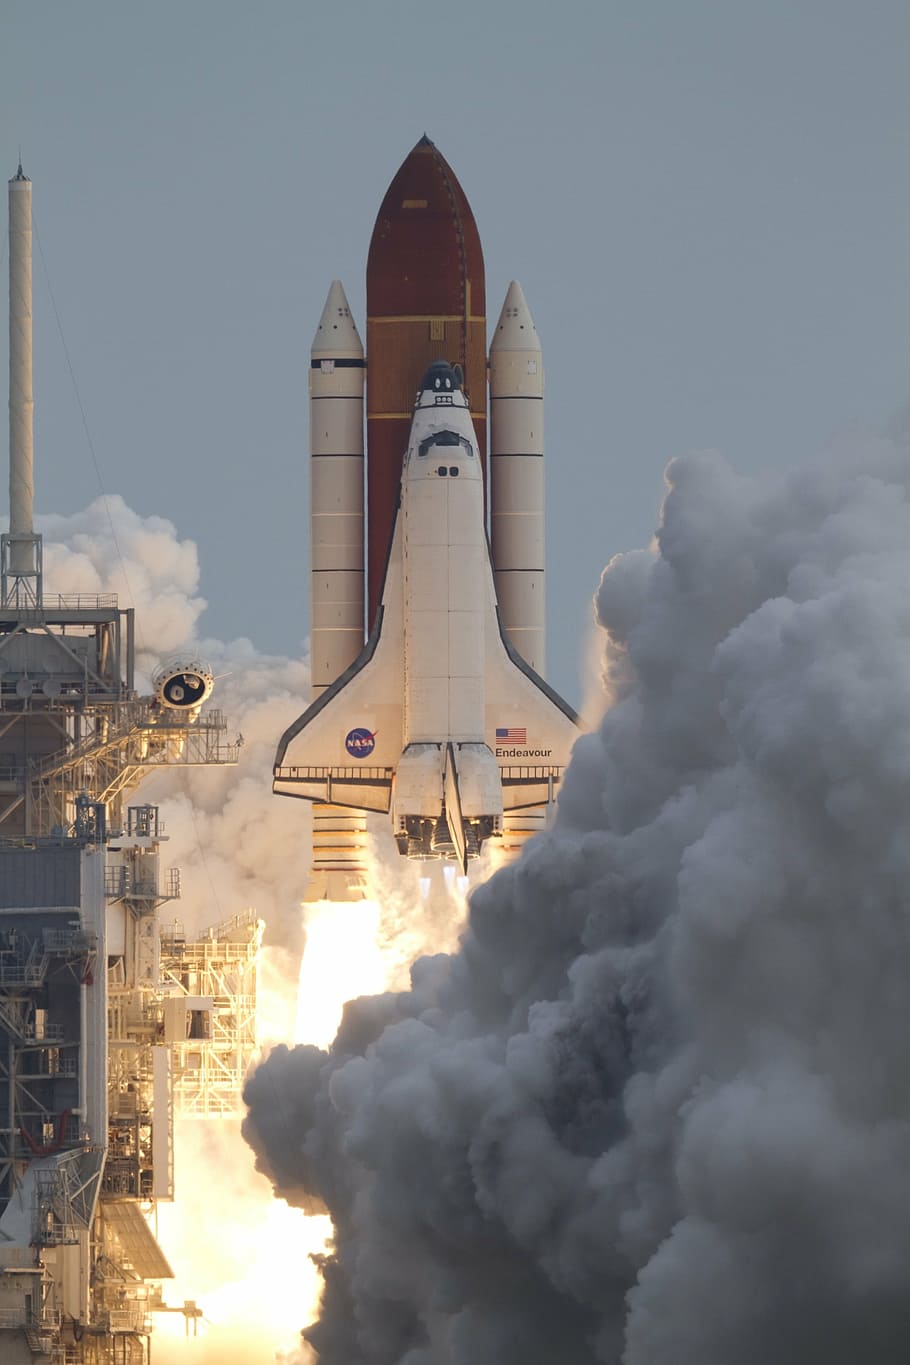 launching, white, space shuttle, space shuttle endeavour, liftoff, launch, launch pad, rocket boosters, exploration, mission